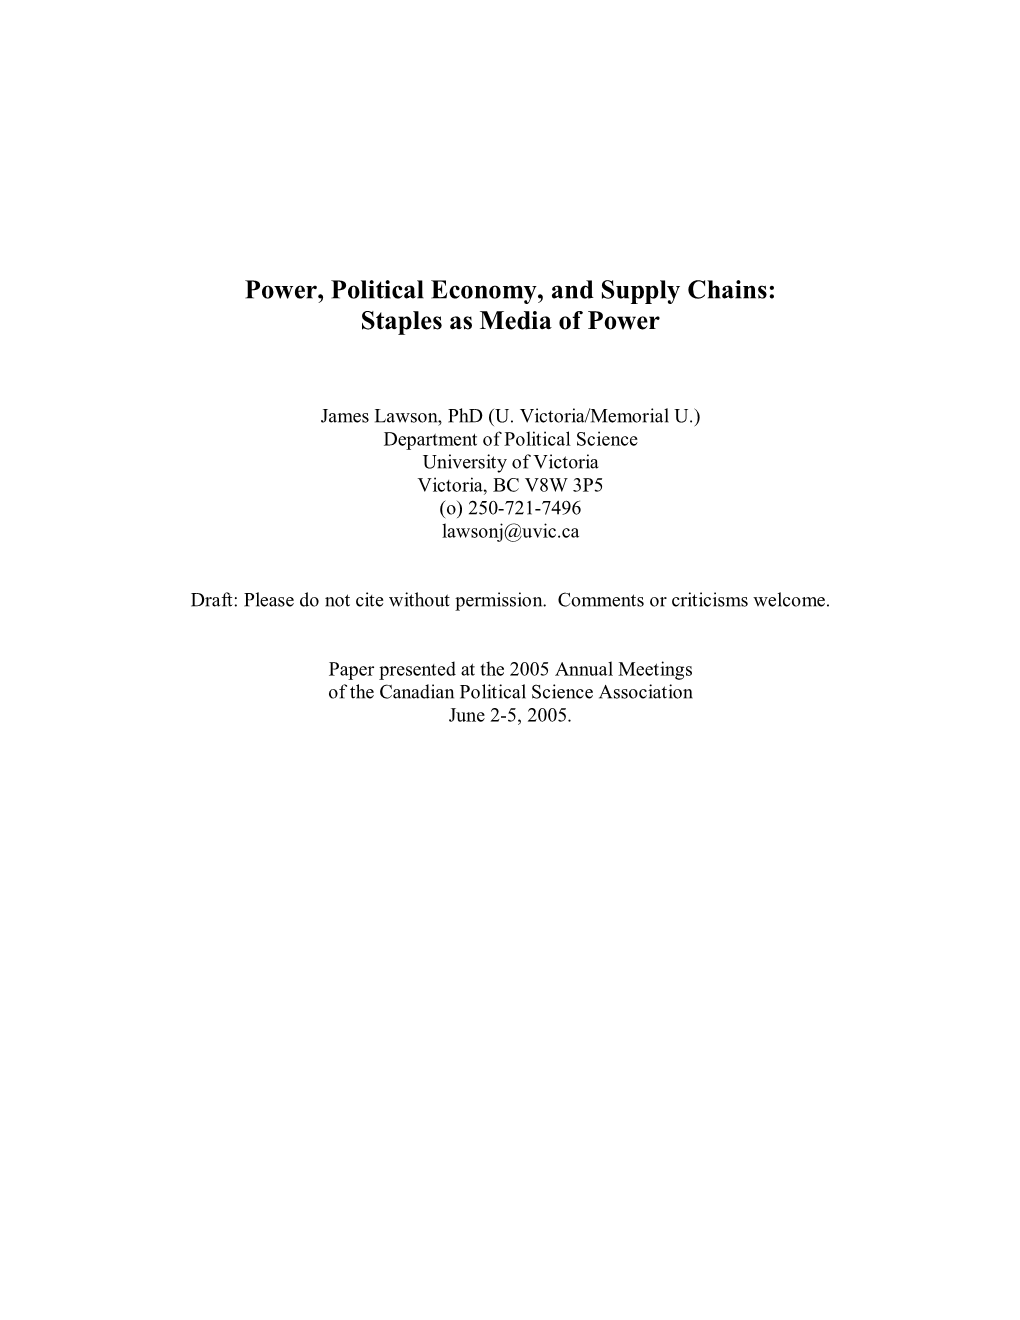 Power, Political Economy, and Supply Chains: Staples As Media of Power